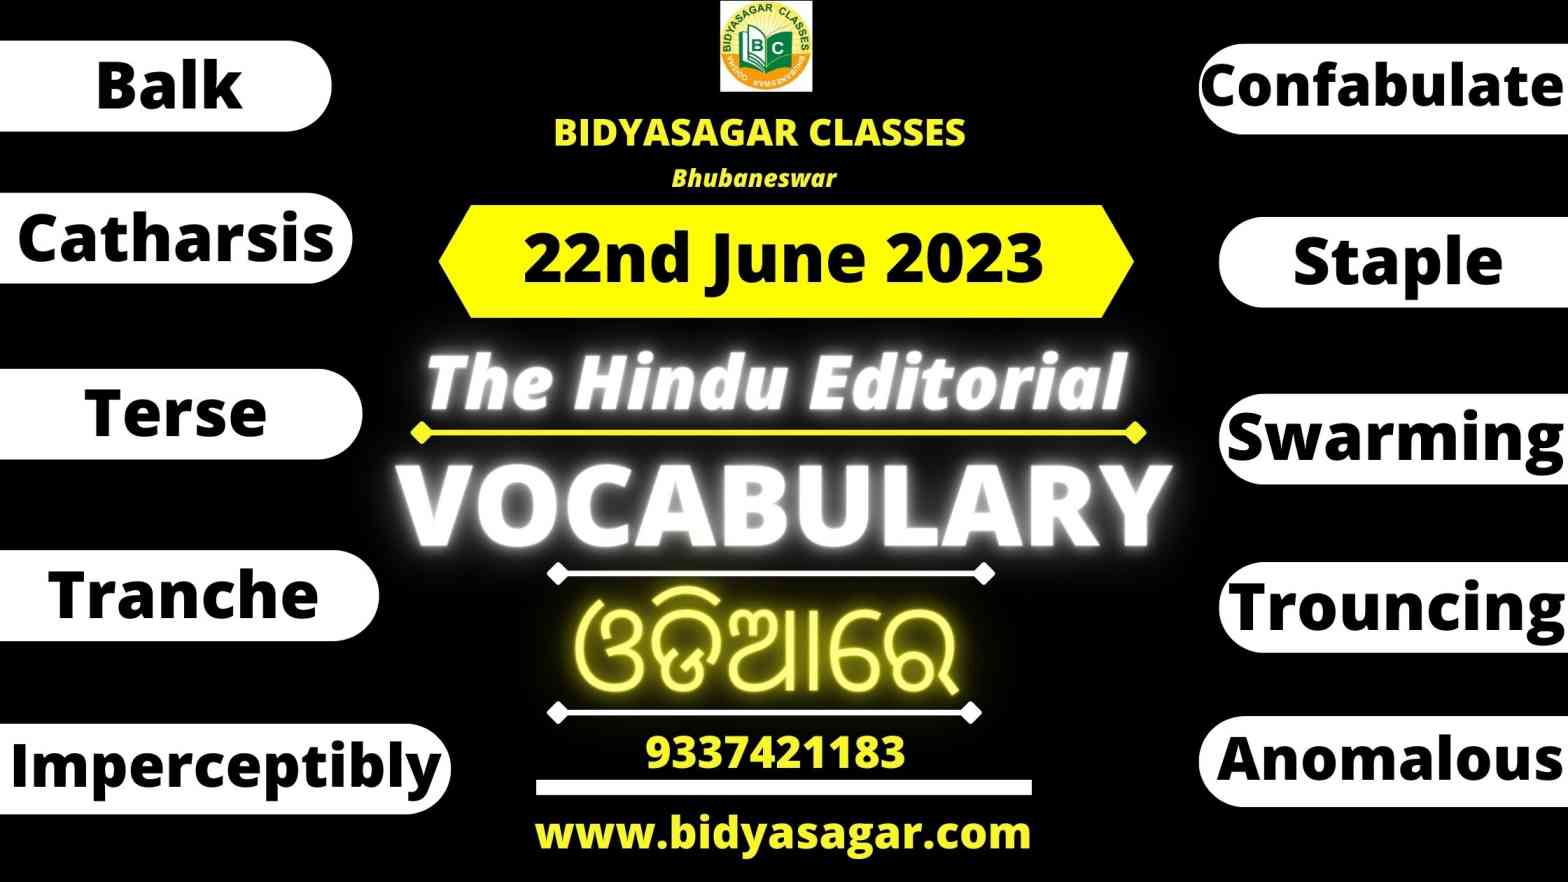 The Hindu Editorial Vocabulary of 22nd June 2023